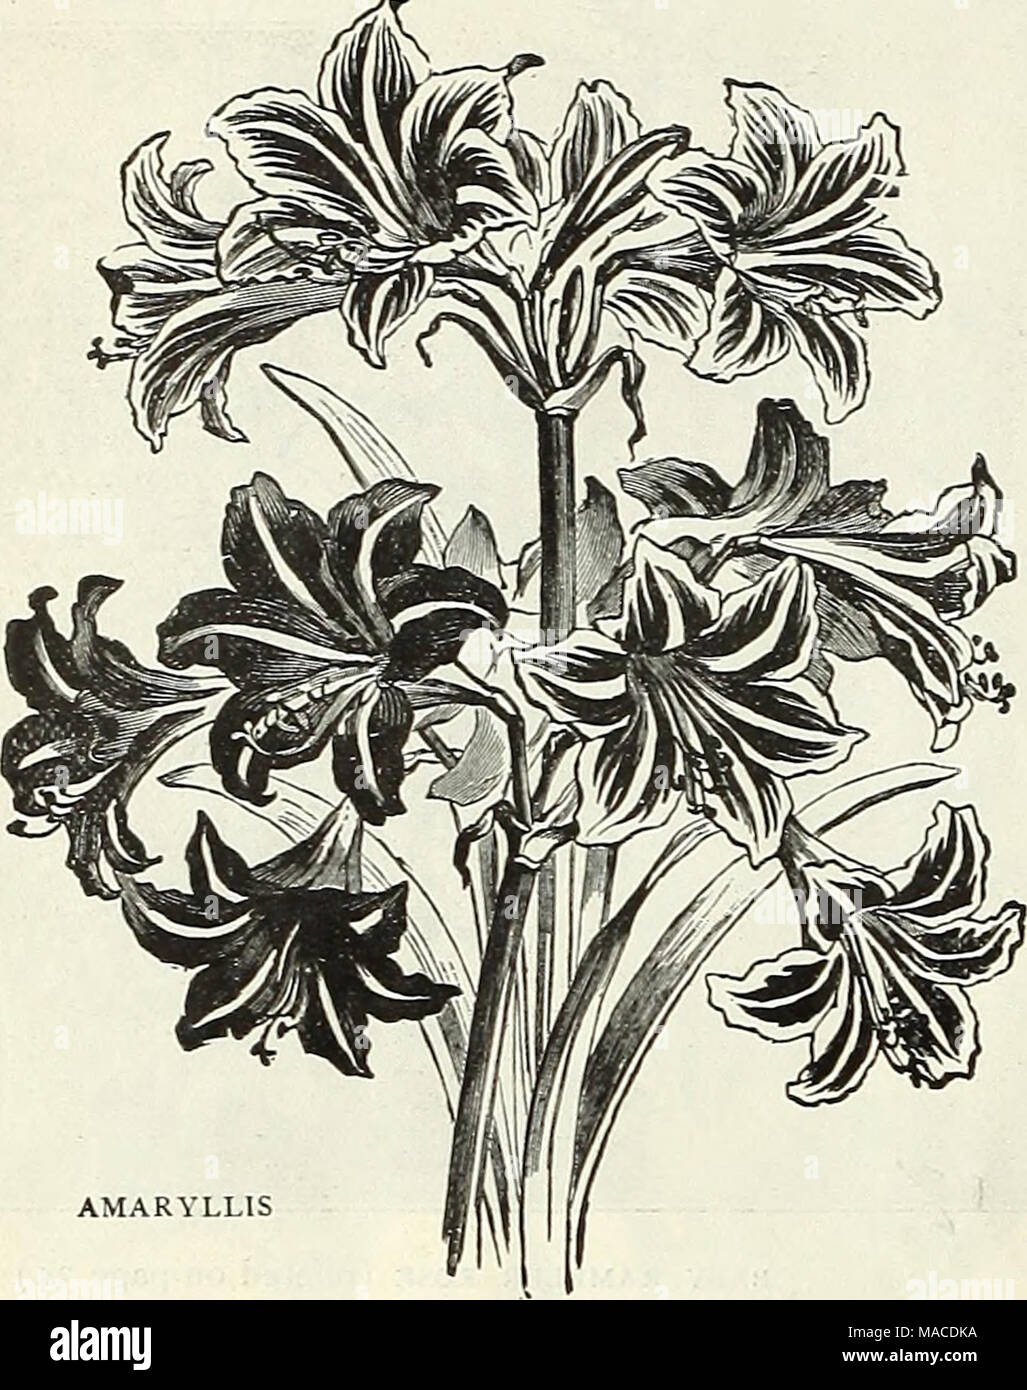 . Dreer's wholesale price list : seeds for florists plants vegetable seeds, tools, fertilizers, sundries, etc . AMARYLLIS Amaryllis. Burbank's Hybrids. We have secured from Mr. Luther Burbank, the eminent hybridizer, the entire stock of his magnificent hybrids. All large bulbs that will give immediate results . . Aulica Platypetala Defiance Equestre Formosissima $4.00 per 100 Johnsonii $15.00 per 100 Prince of Orange Solandriflora conspicum Vitatta Hybrids Each Per doz. 50 $5 00 50 5 00 40 4 00 10 1 00 05 50 20 2 00 40 4 00 5° 5 00 3° 3 00 Amorphophallus. Rivieri. Strong bulbs . 30 3 00 Tubero Stock Photo